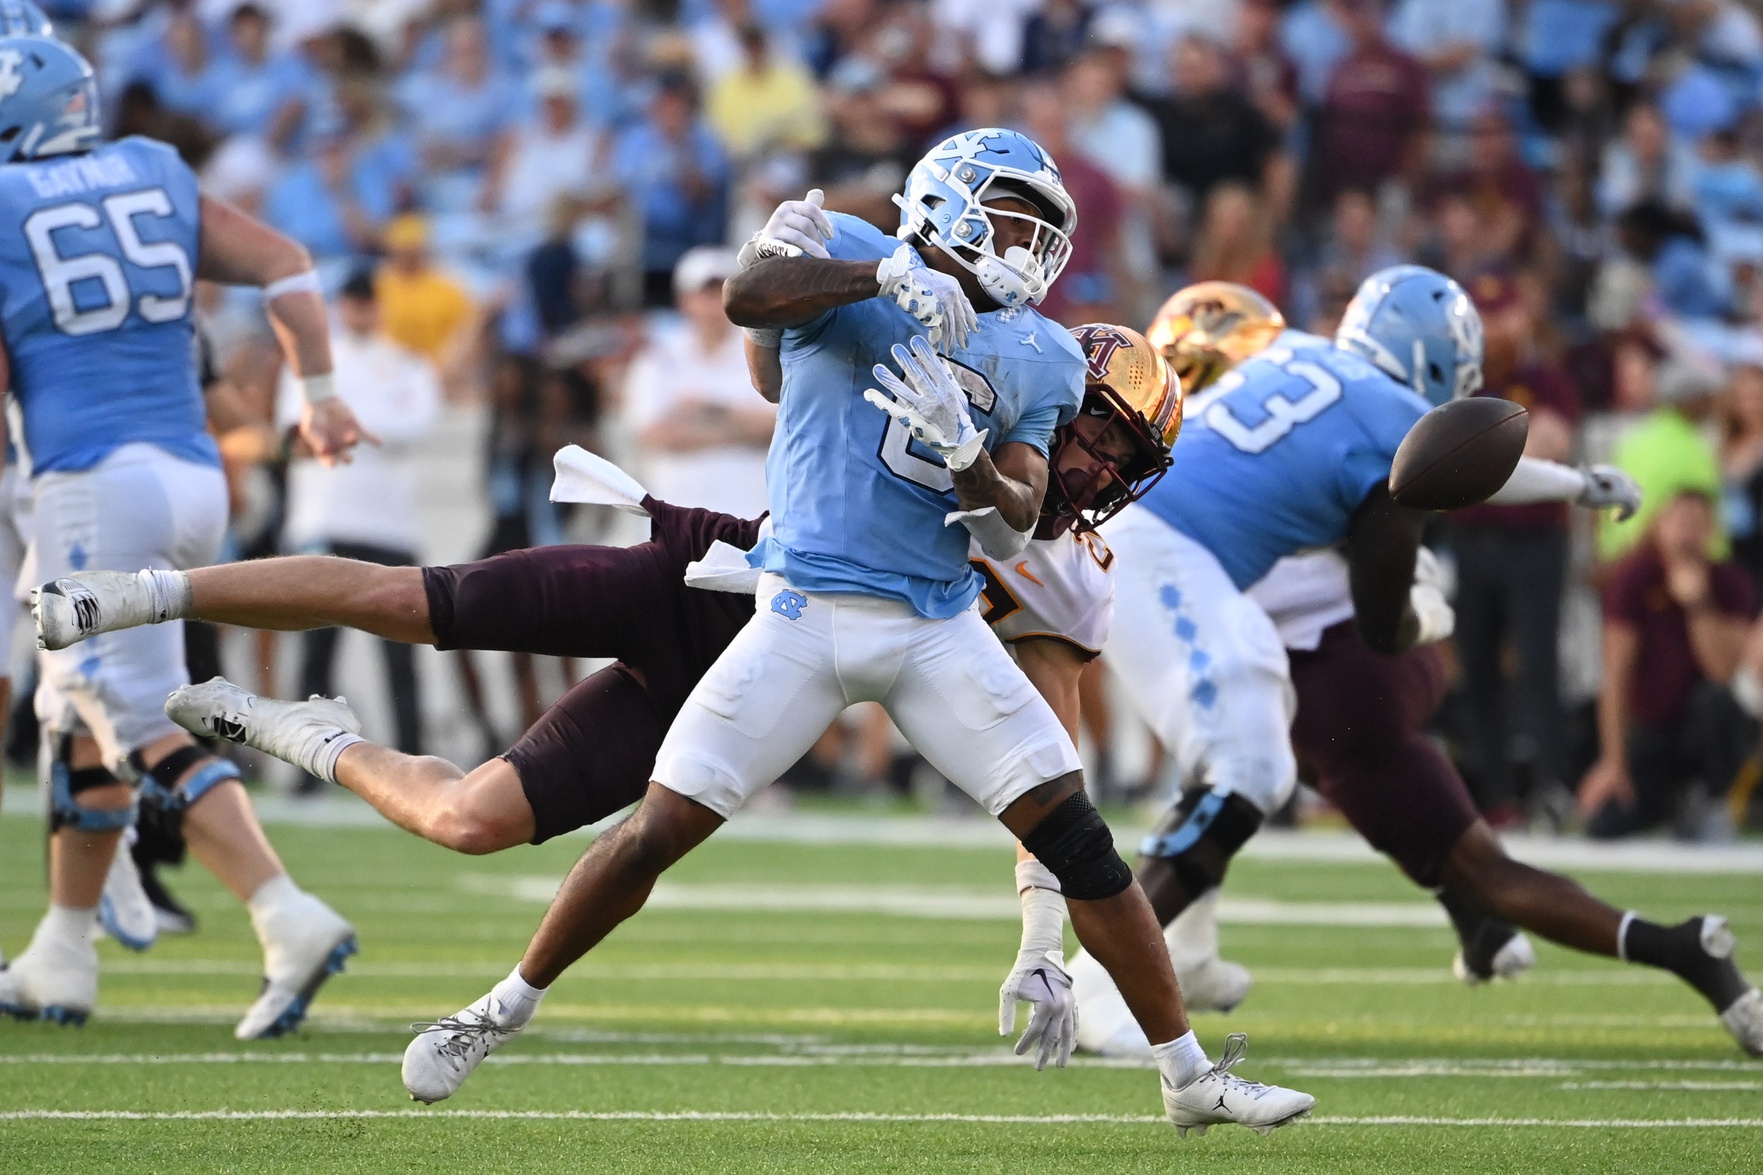 Nate McCollum (6) is unable to catch the ball as Minnesota Golden Gophers defensive back Jack Henderson (20) defends in the fourth quarter at Kenan Memorial Stadium.